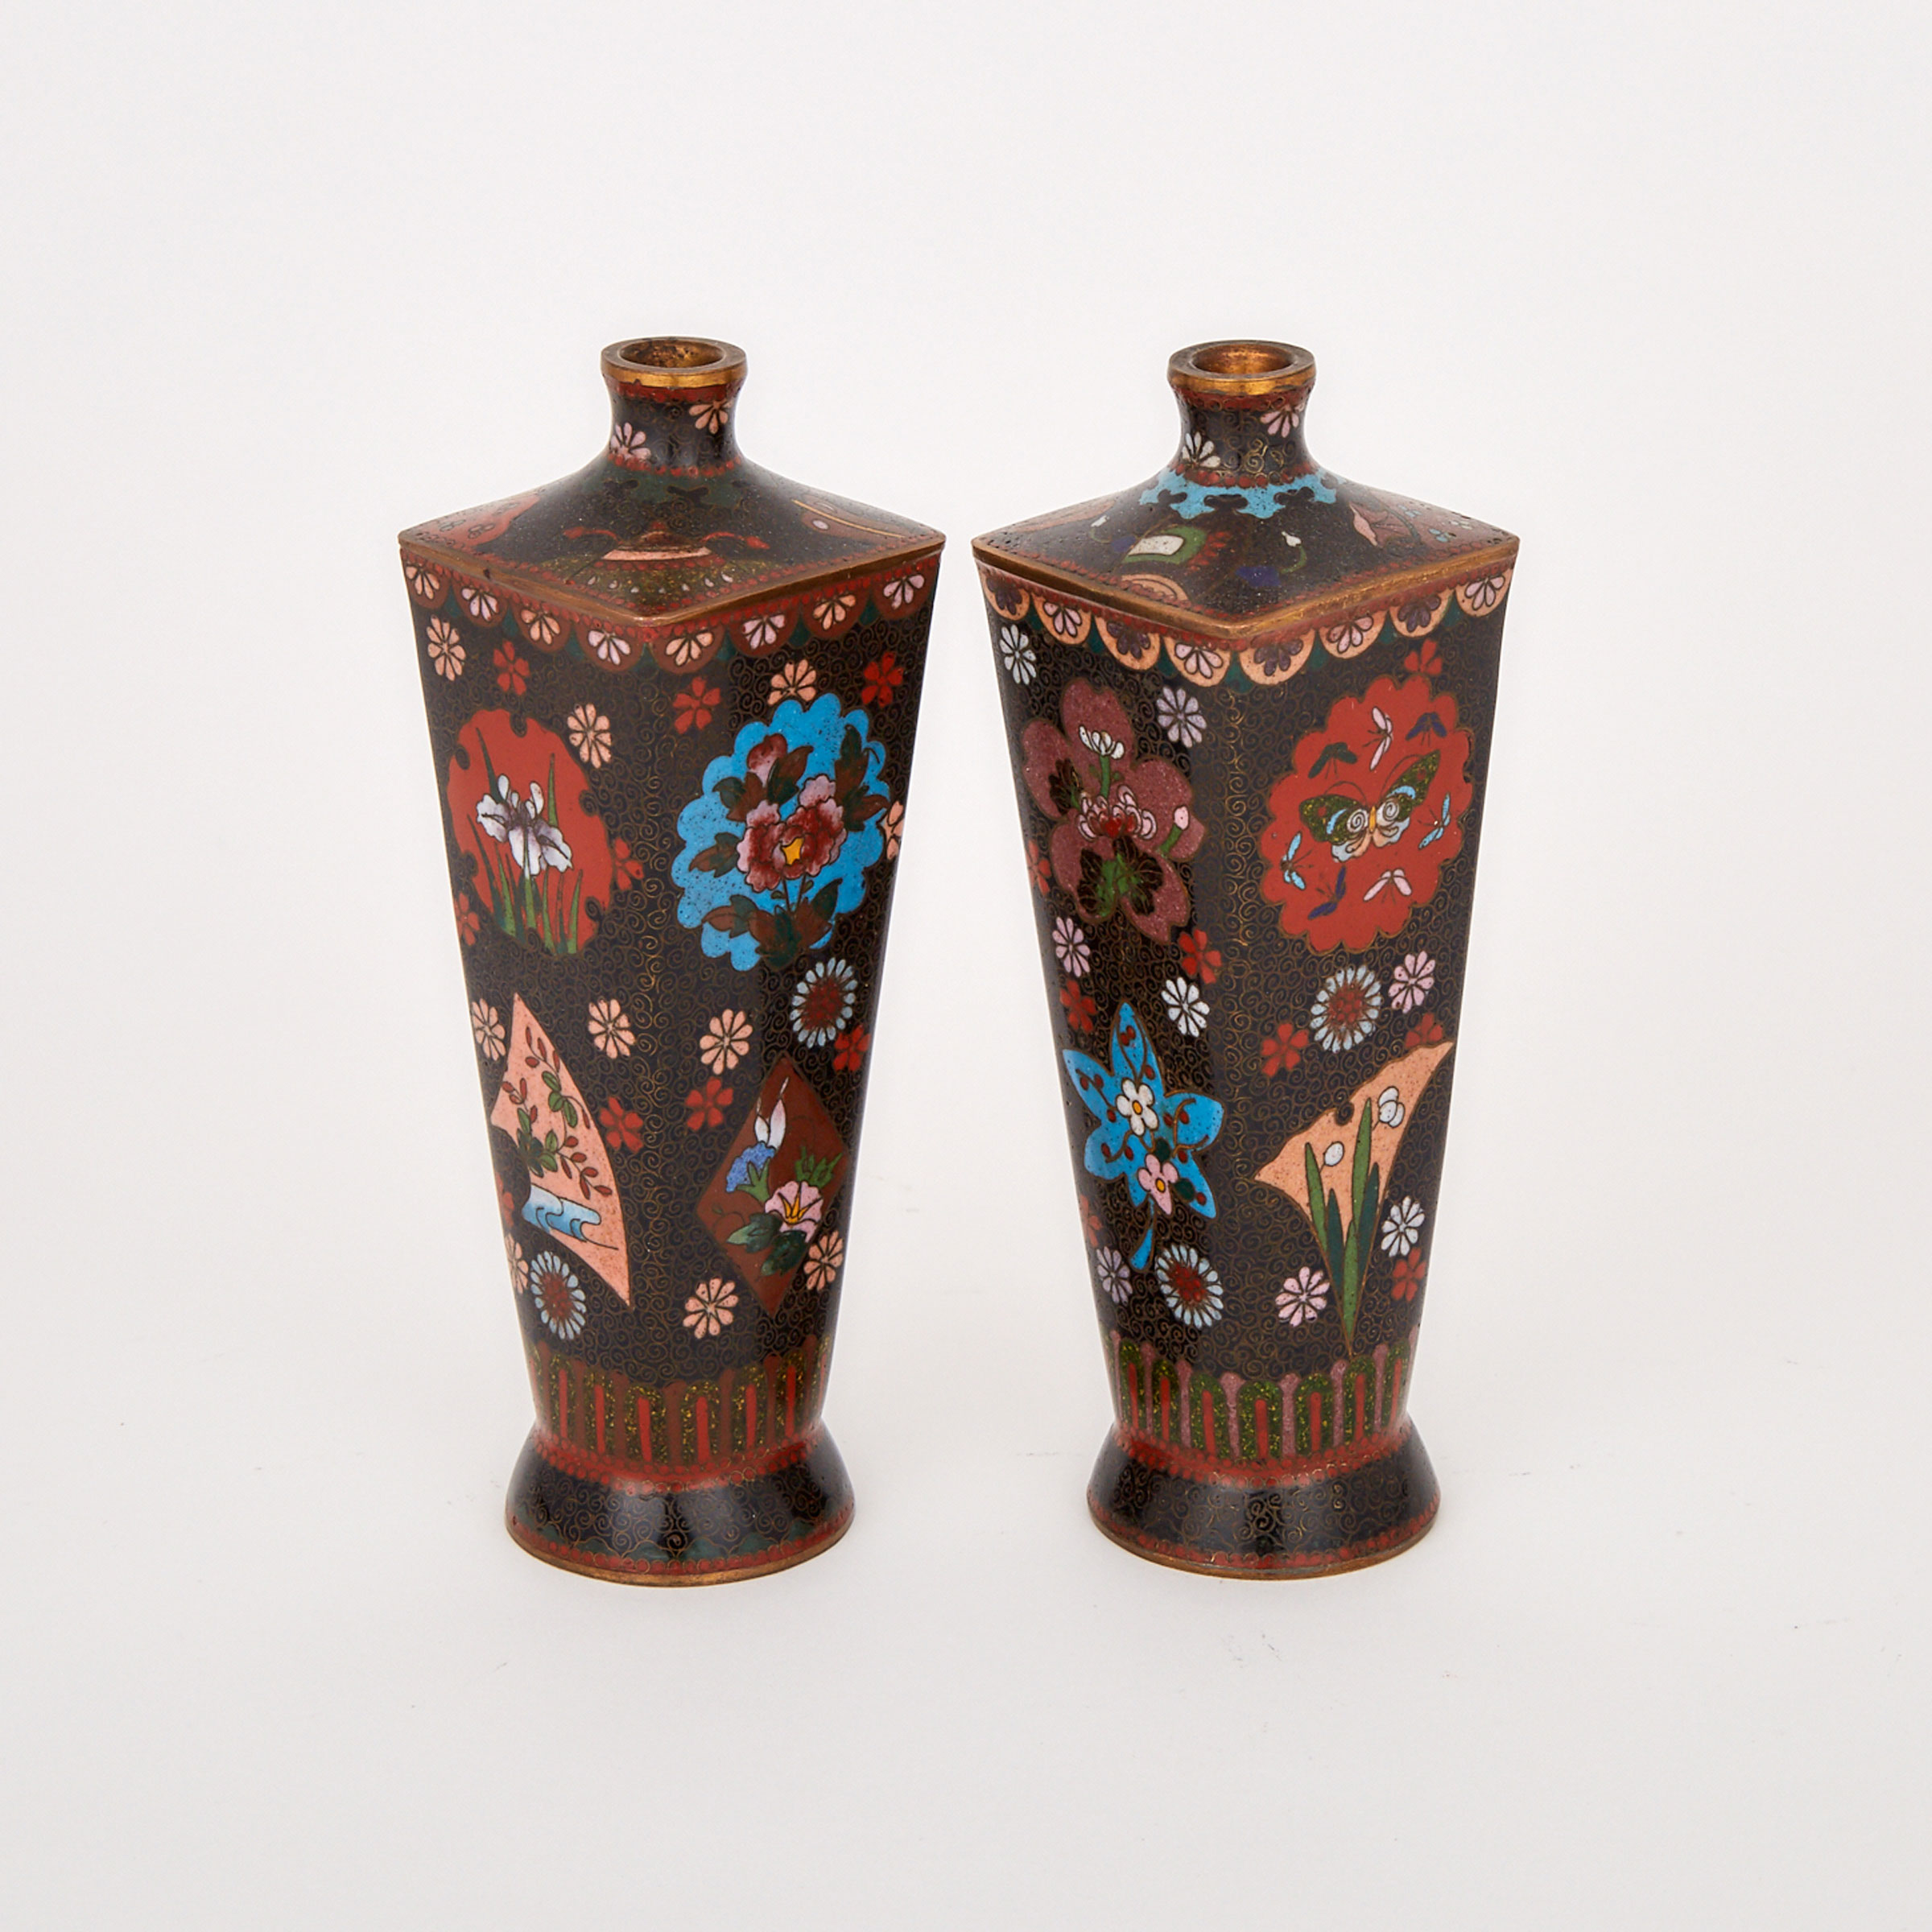 A Pair of Miniature Square Tapering Cloisonné Vases